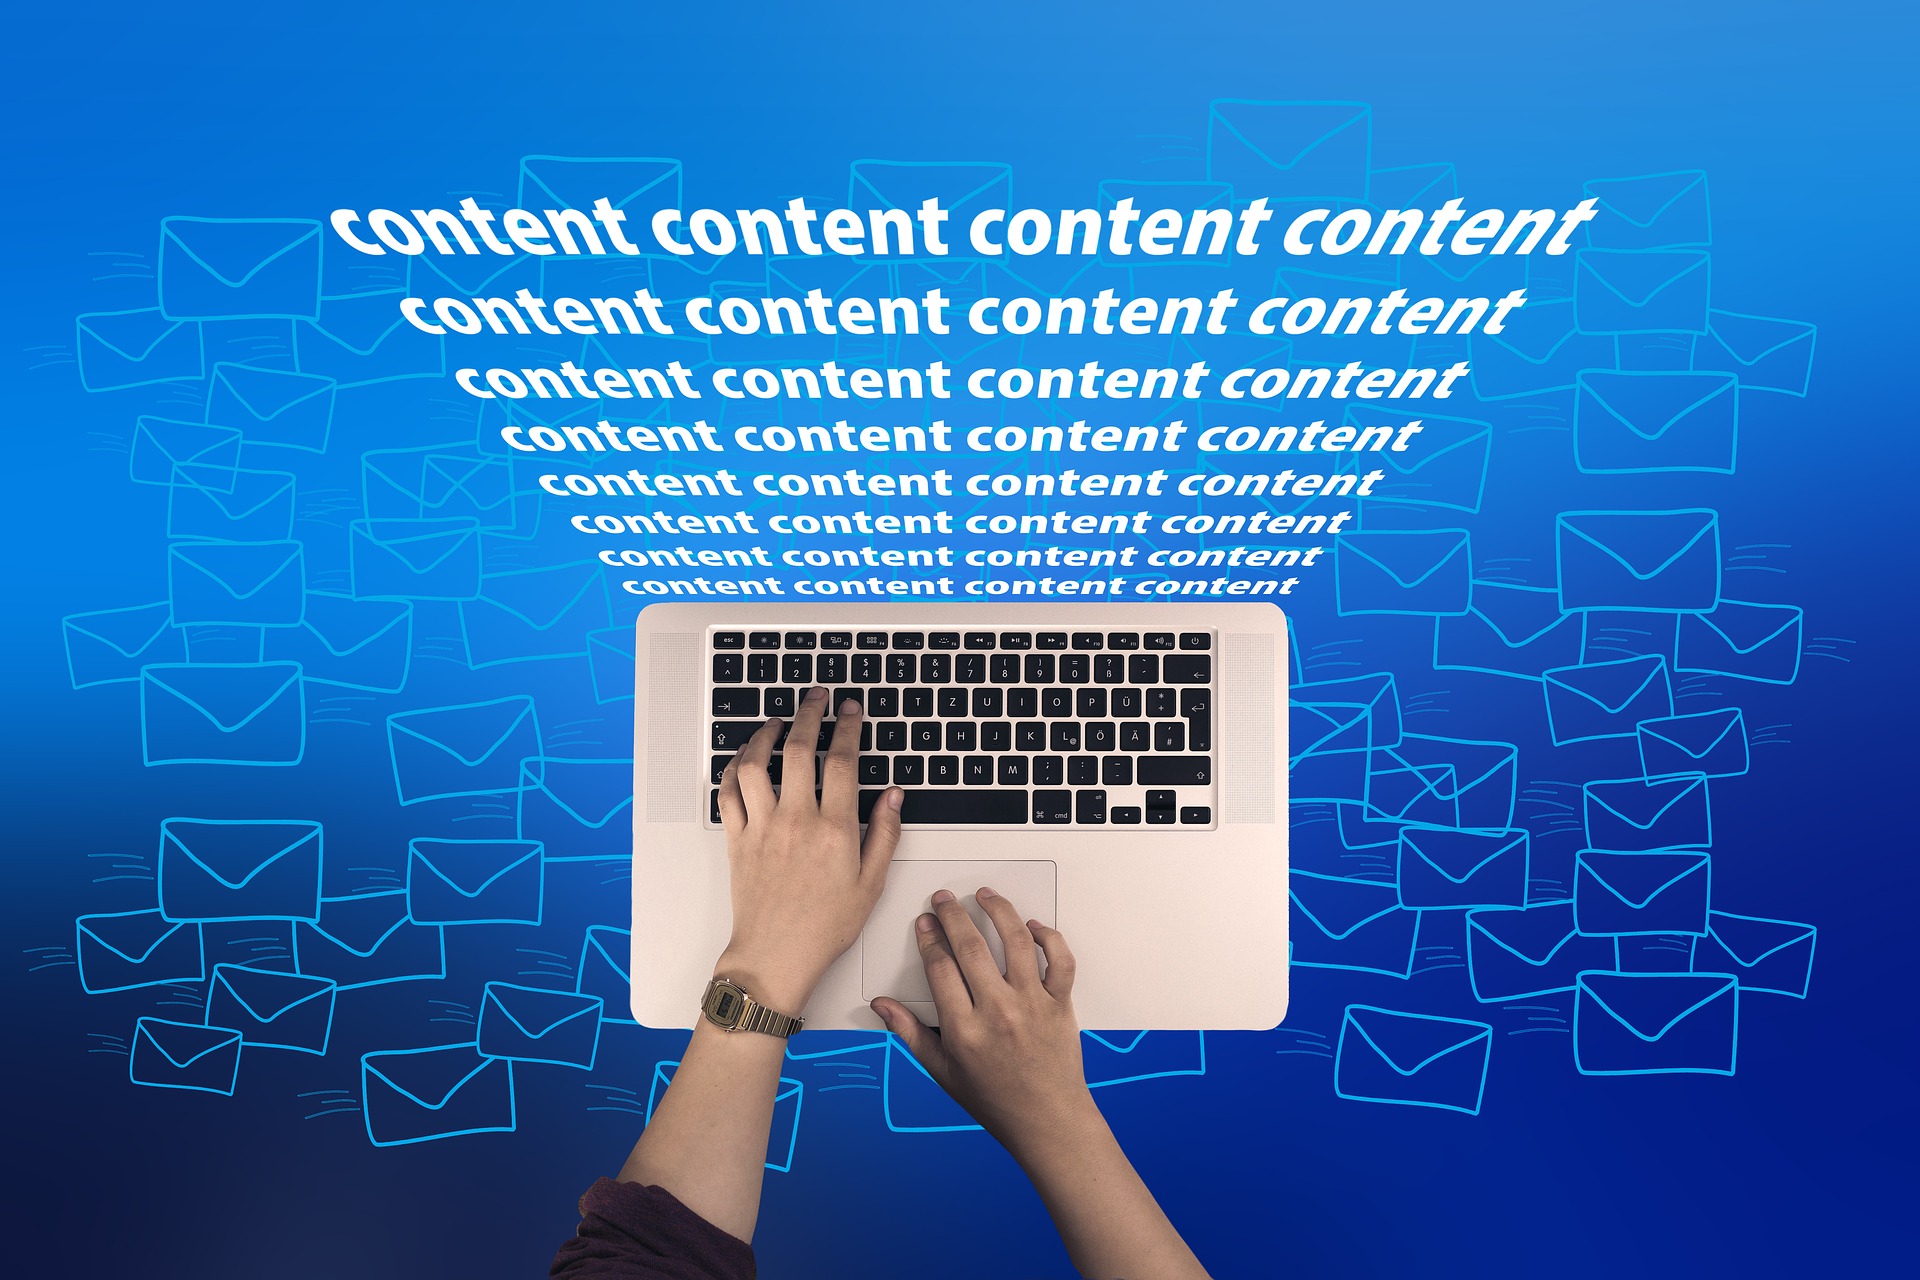 Step-by-step guide for publishing content with M365 featured image of computer typing content